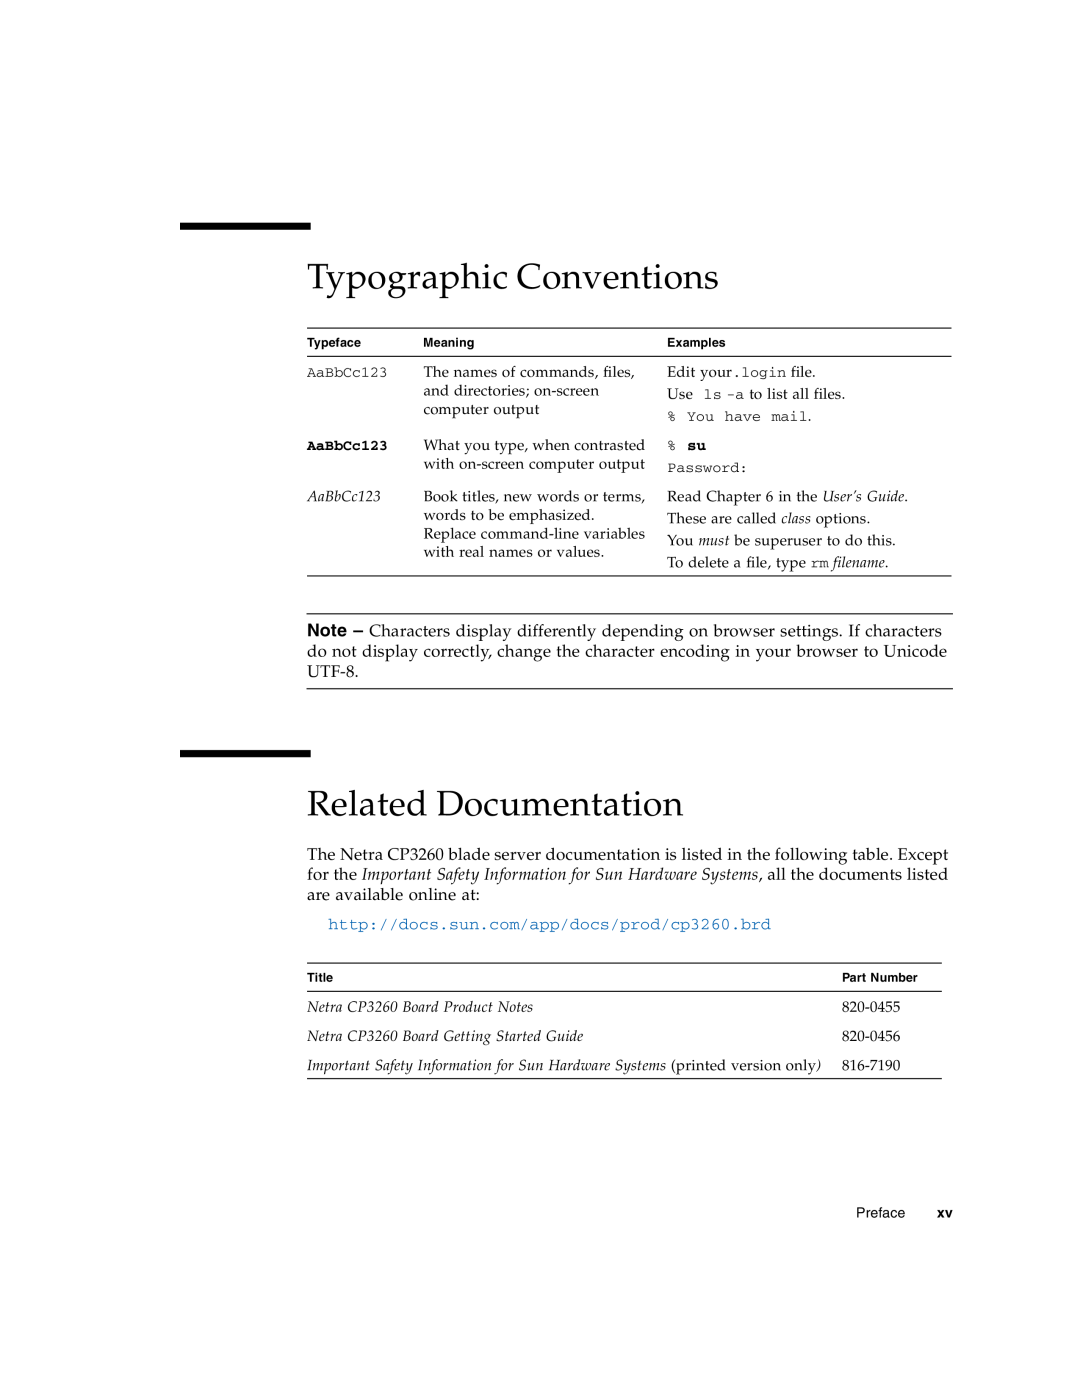 Sun Microsystems CP3260 manual Typographic Conventions, Related Documentation 